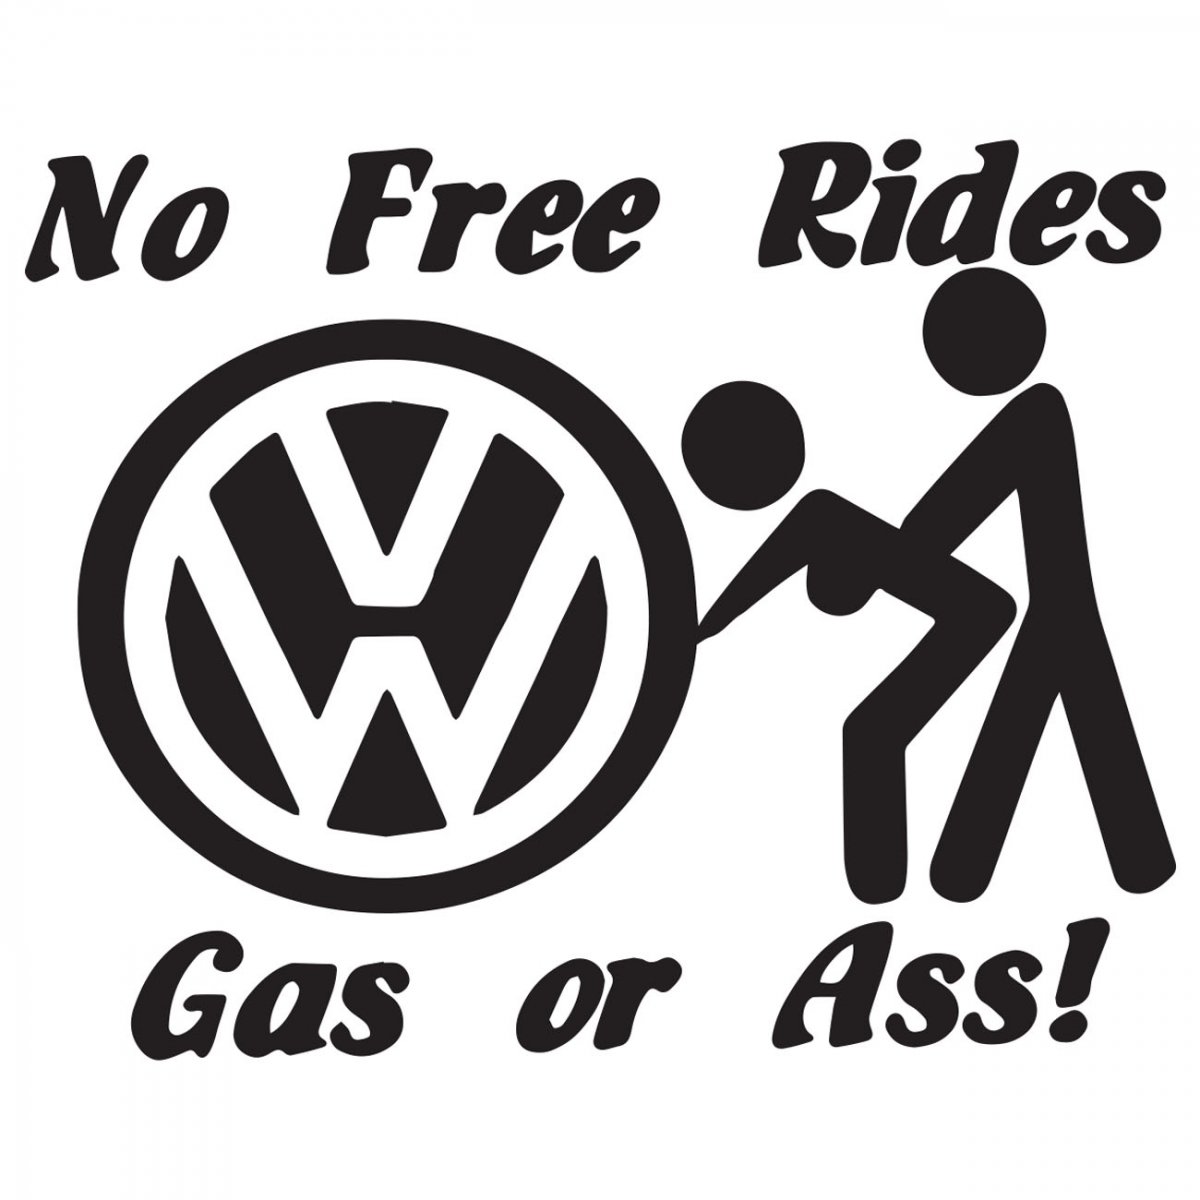 Dodge ram no free rides gas or ass window decal sticker aftermarket replacement non factory custom sticker shop